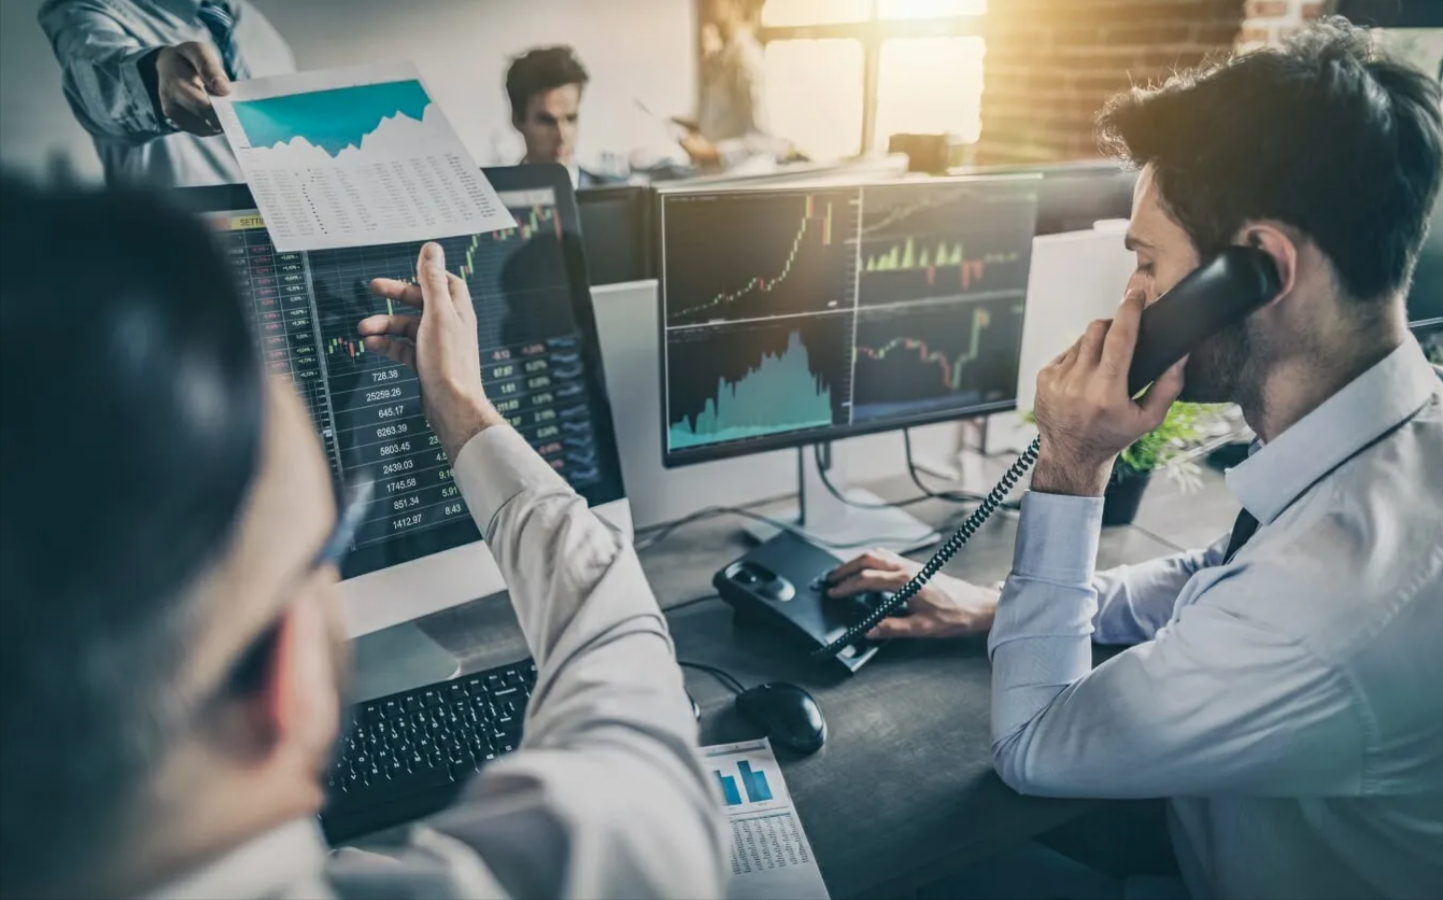 What separates a trader from an investor in AU